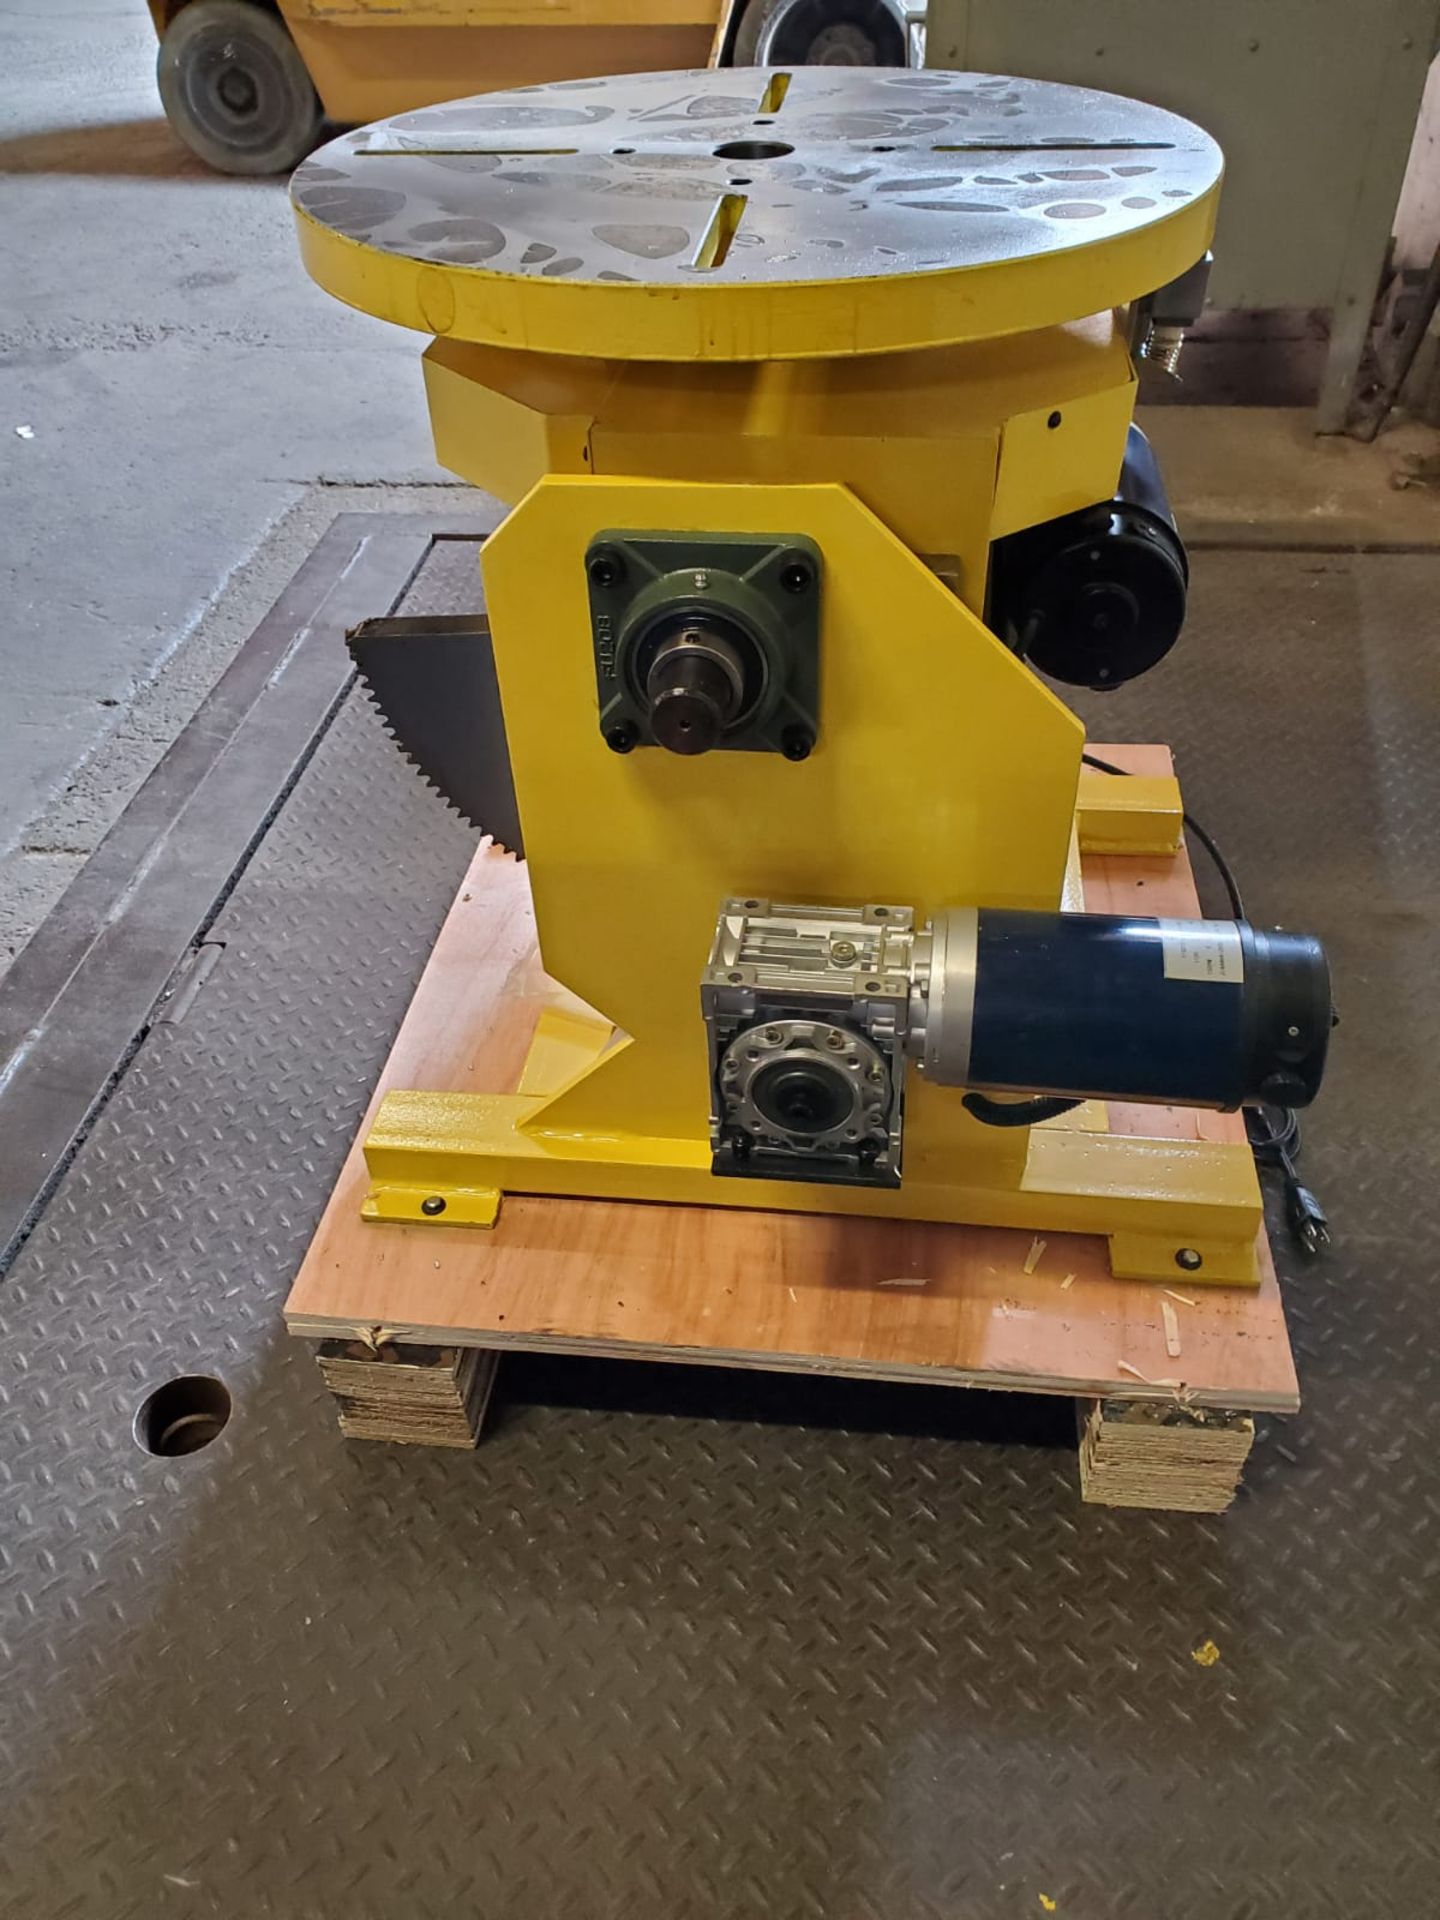 Verner model VD-1250 WELDING POSITIONER 1250lbs capacity - tilt and rotate - UNUSED AND MINT 115V - Image 3 of 4